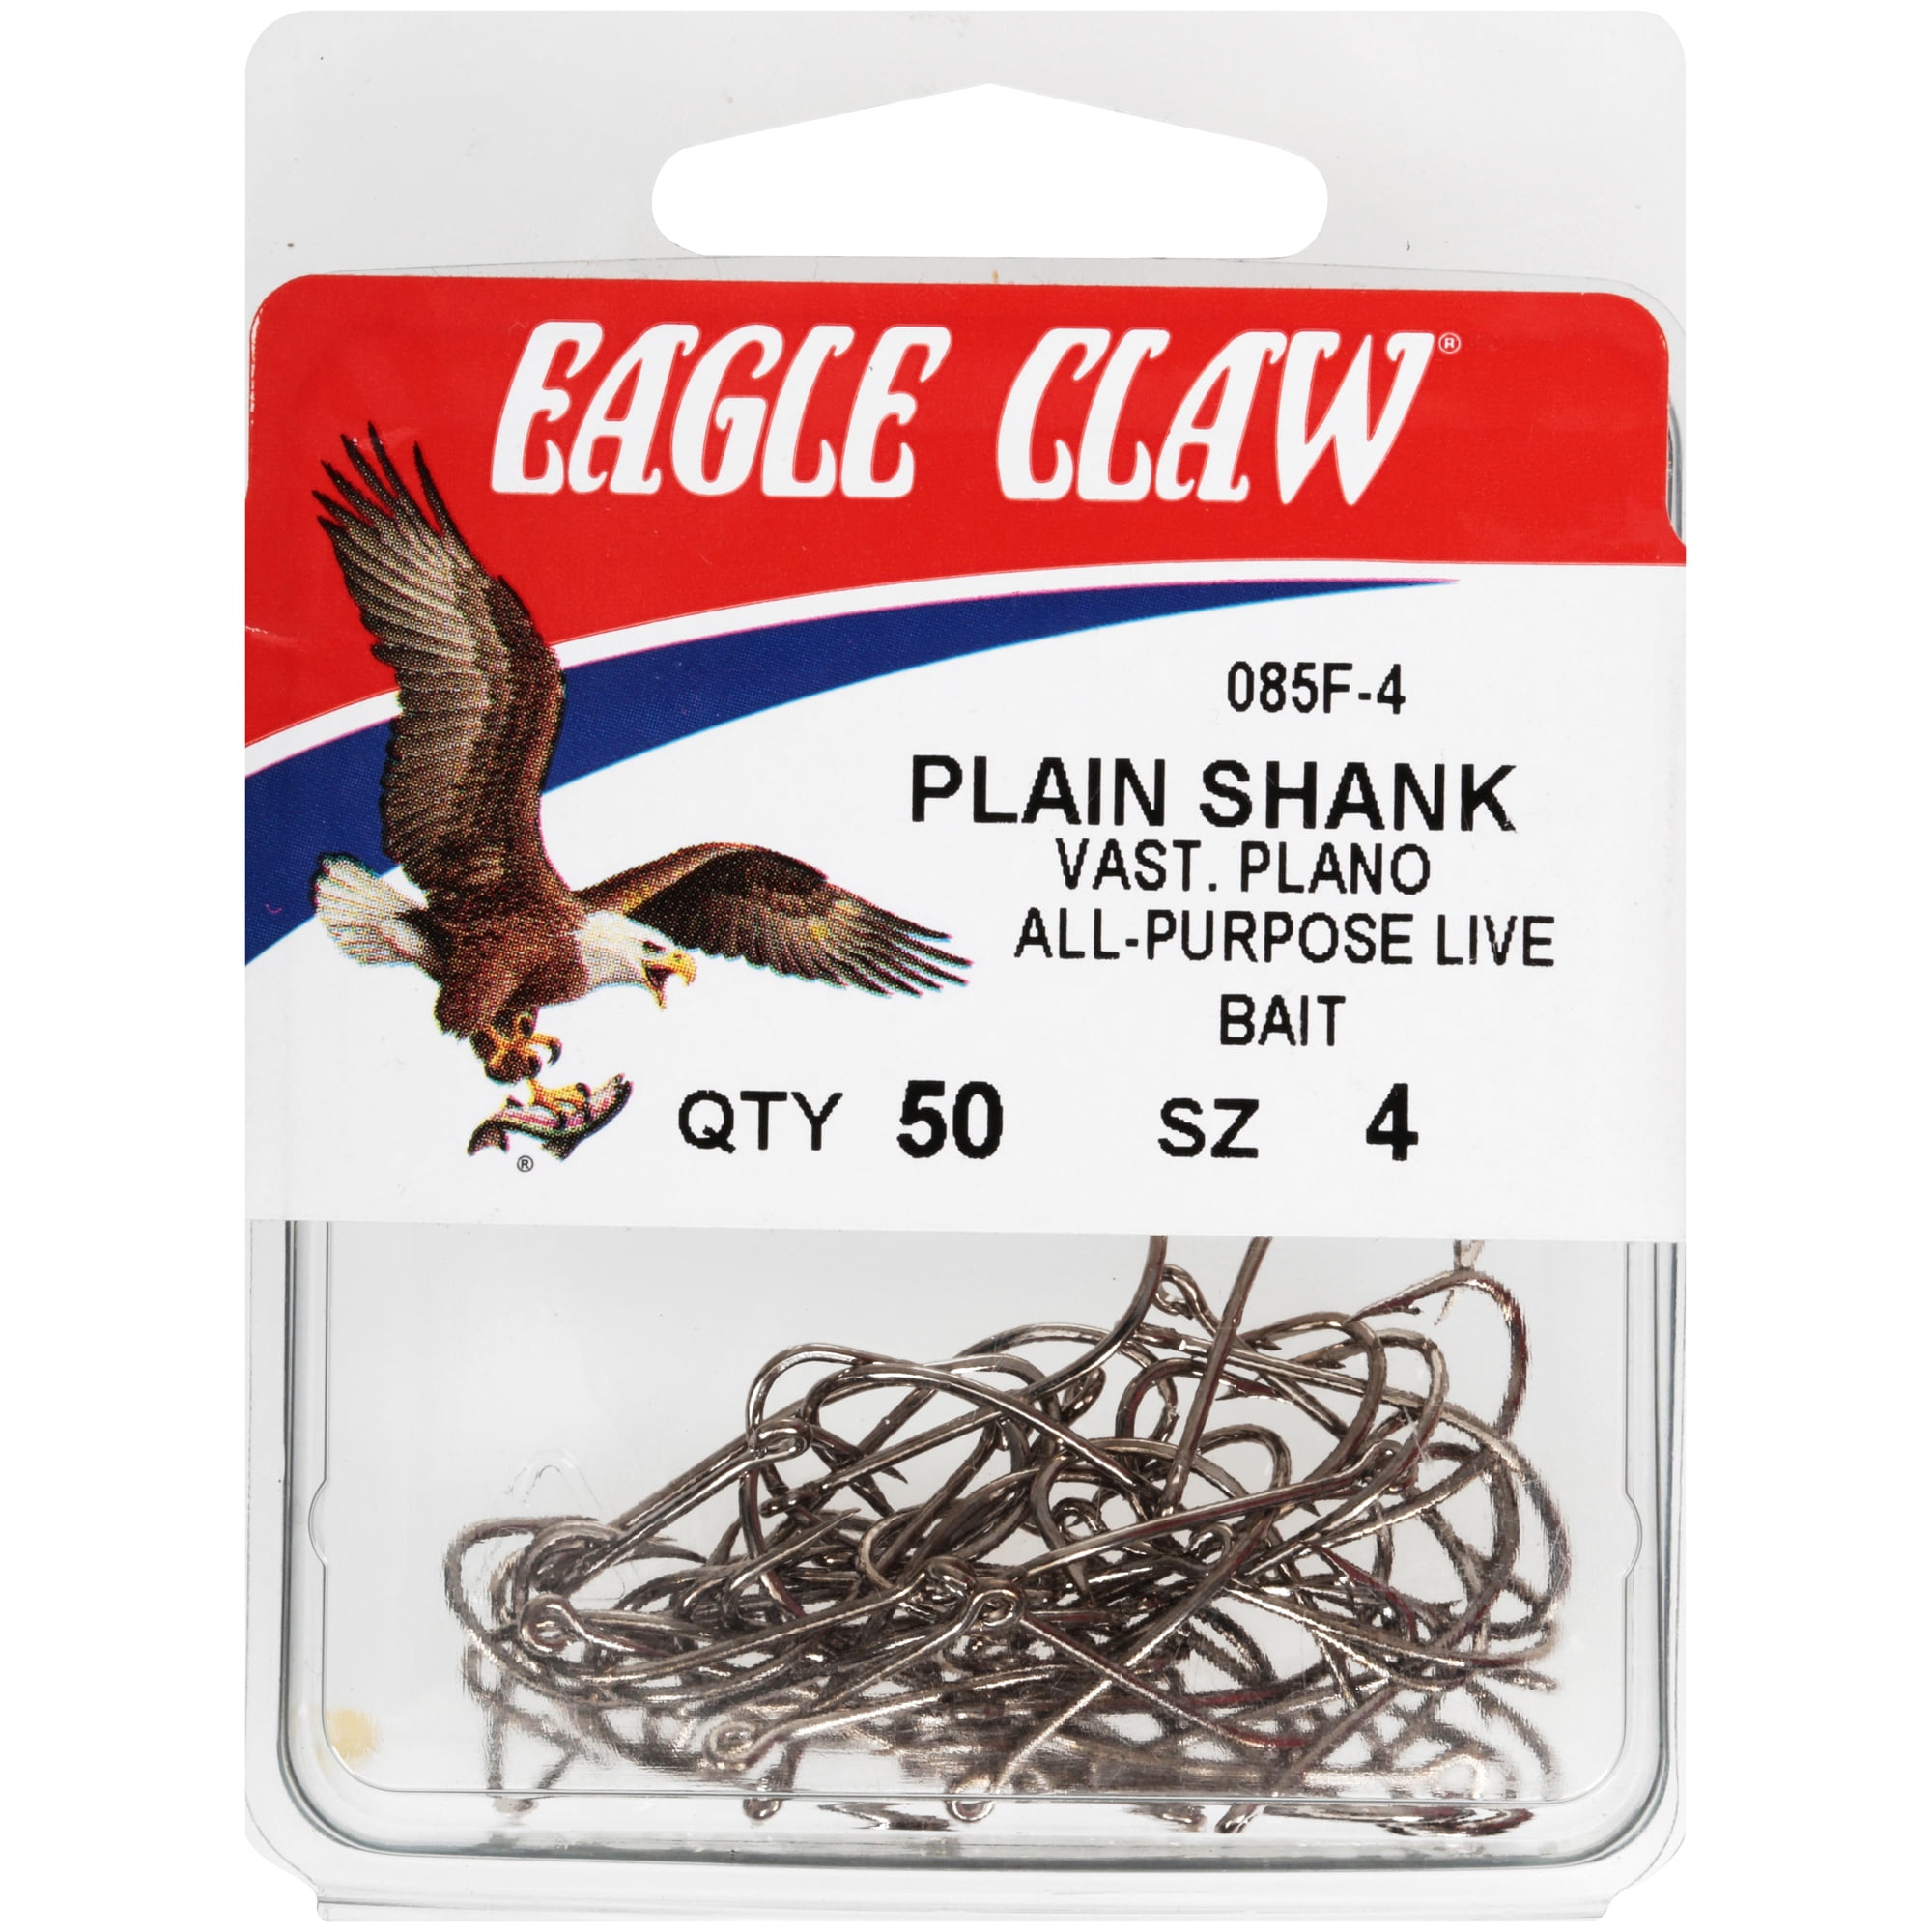 Eagle Claw 085FH-4 All-Purpose Live Bait Plain Shank Fish Hooks 50 Pack,  Size 4 